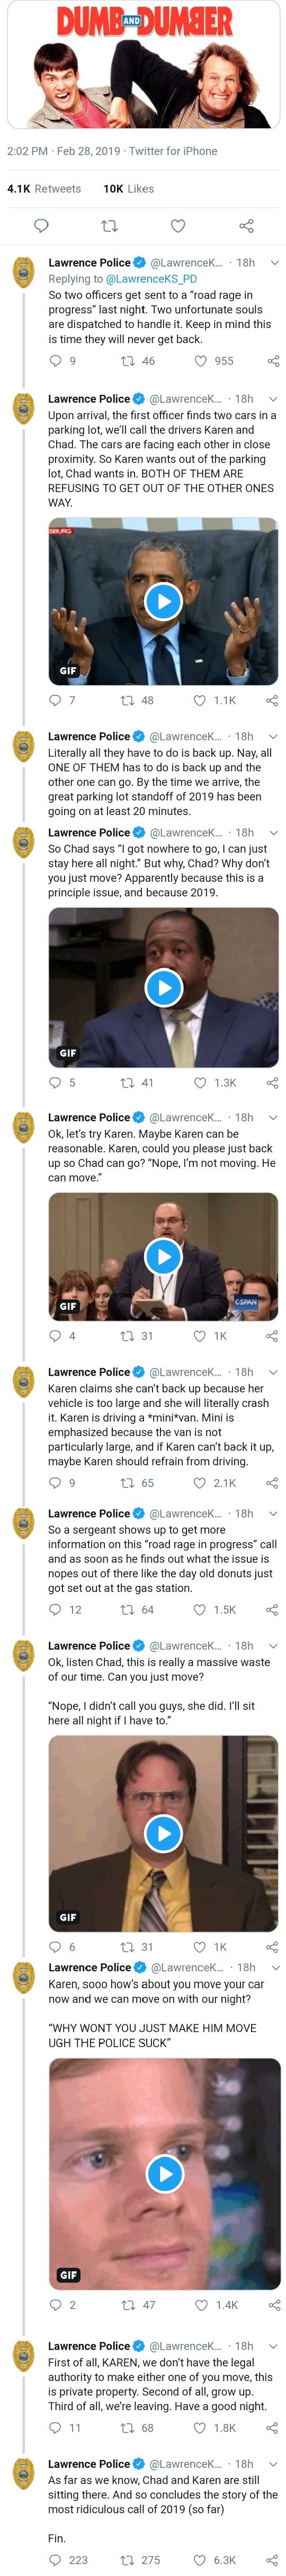 Lawrence PD / Chad and Karen Standoff